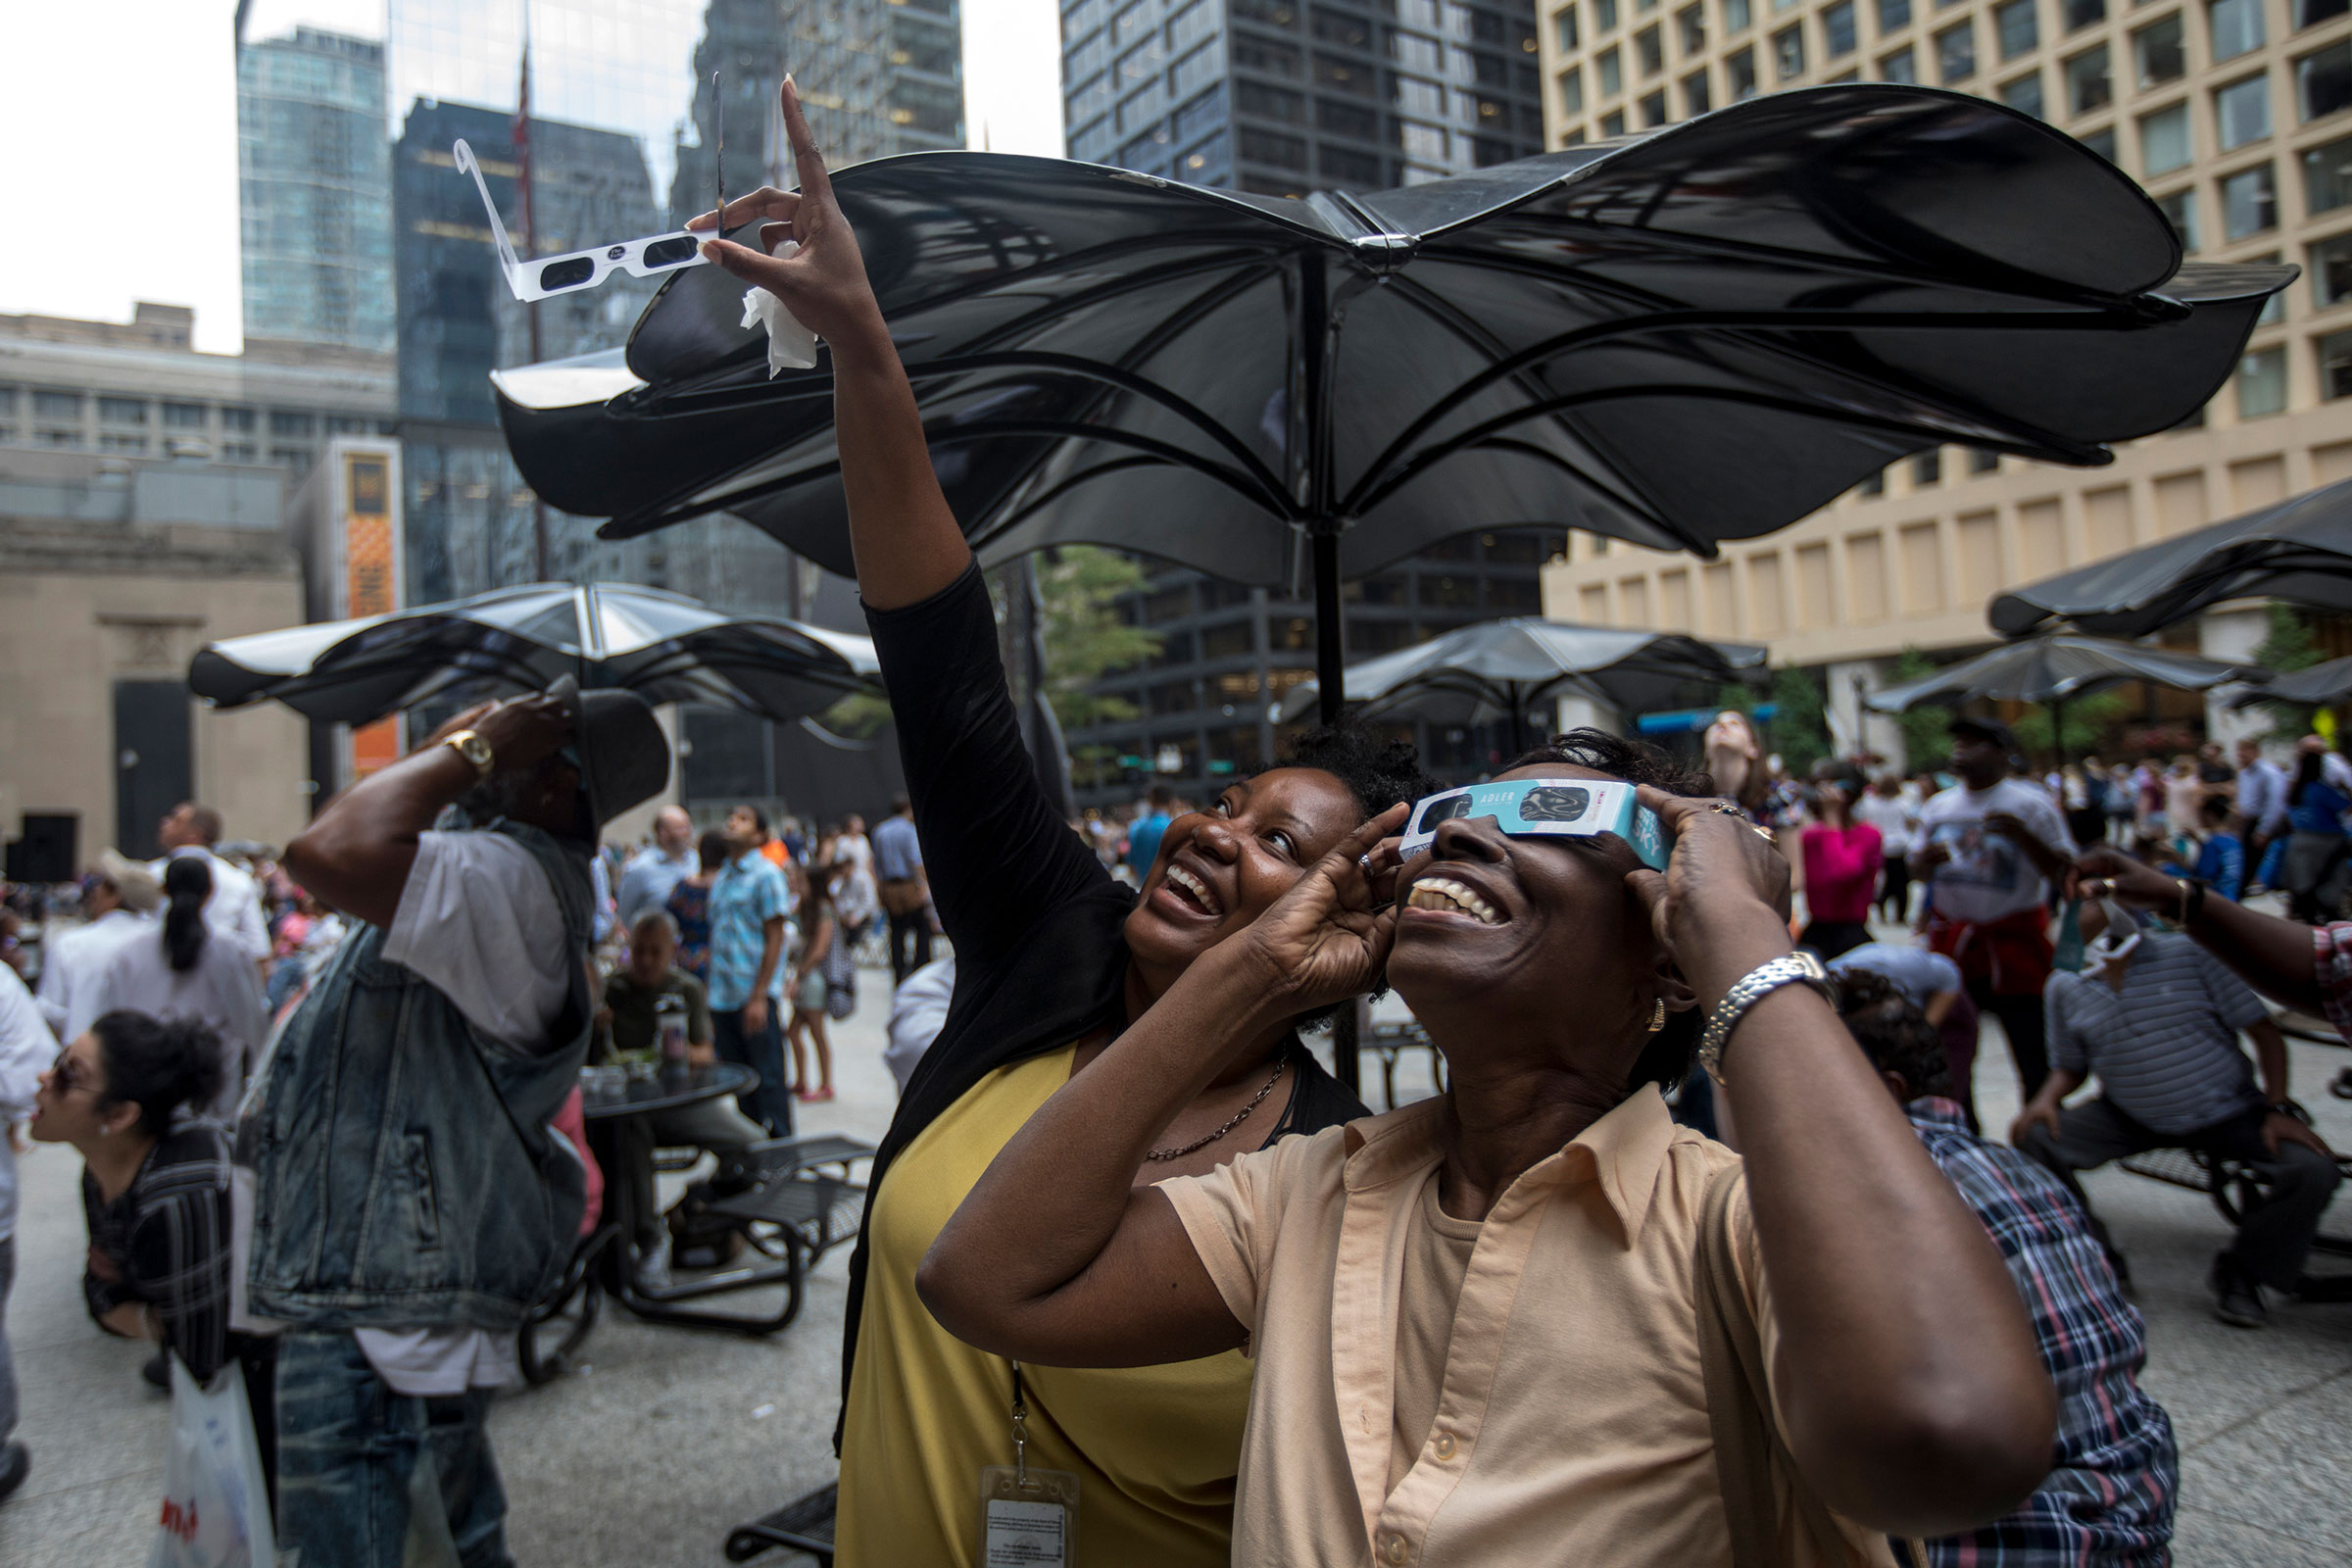 People react as the solar eclipse becomes visible through the clouds in Daley Plaza in downtown Chicago on Aug. 21, 2017.